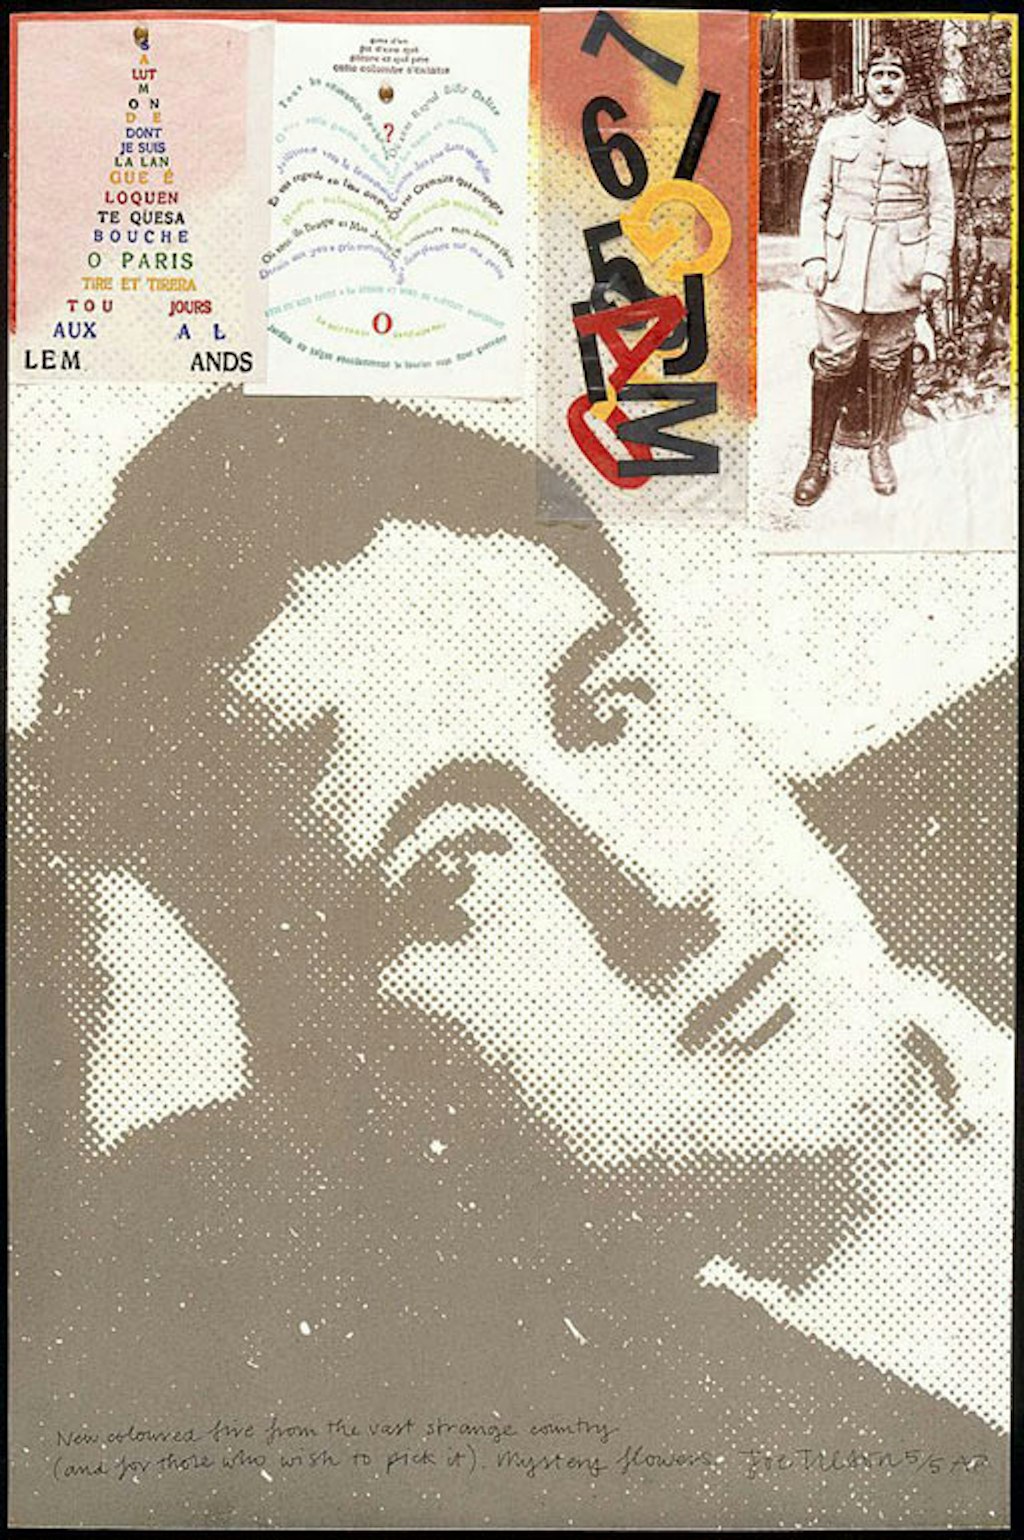 Collage including a black-and-white photograph of a person leaning on their hand, a person in a uniform, the Eiffel Tower and a jumble of letters and numbers.